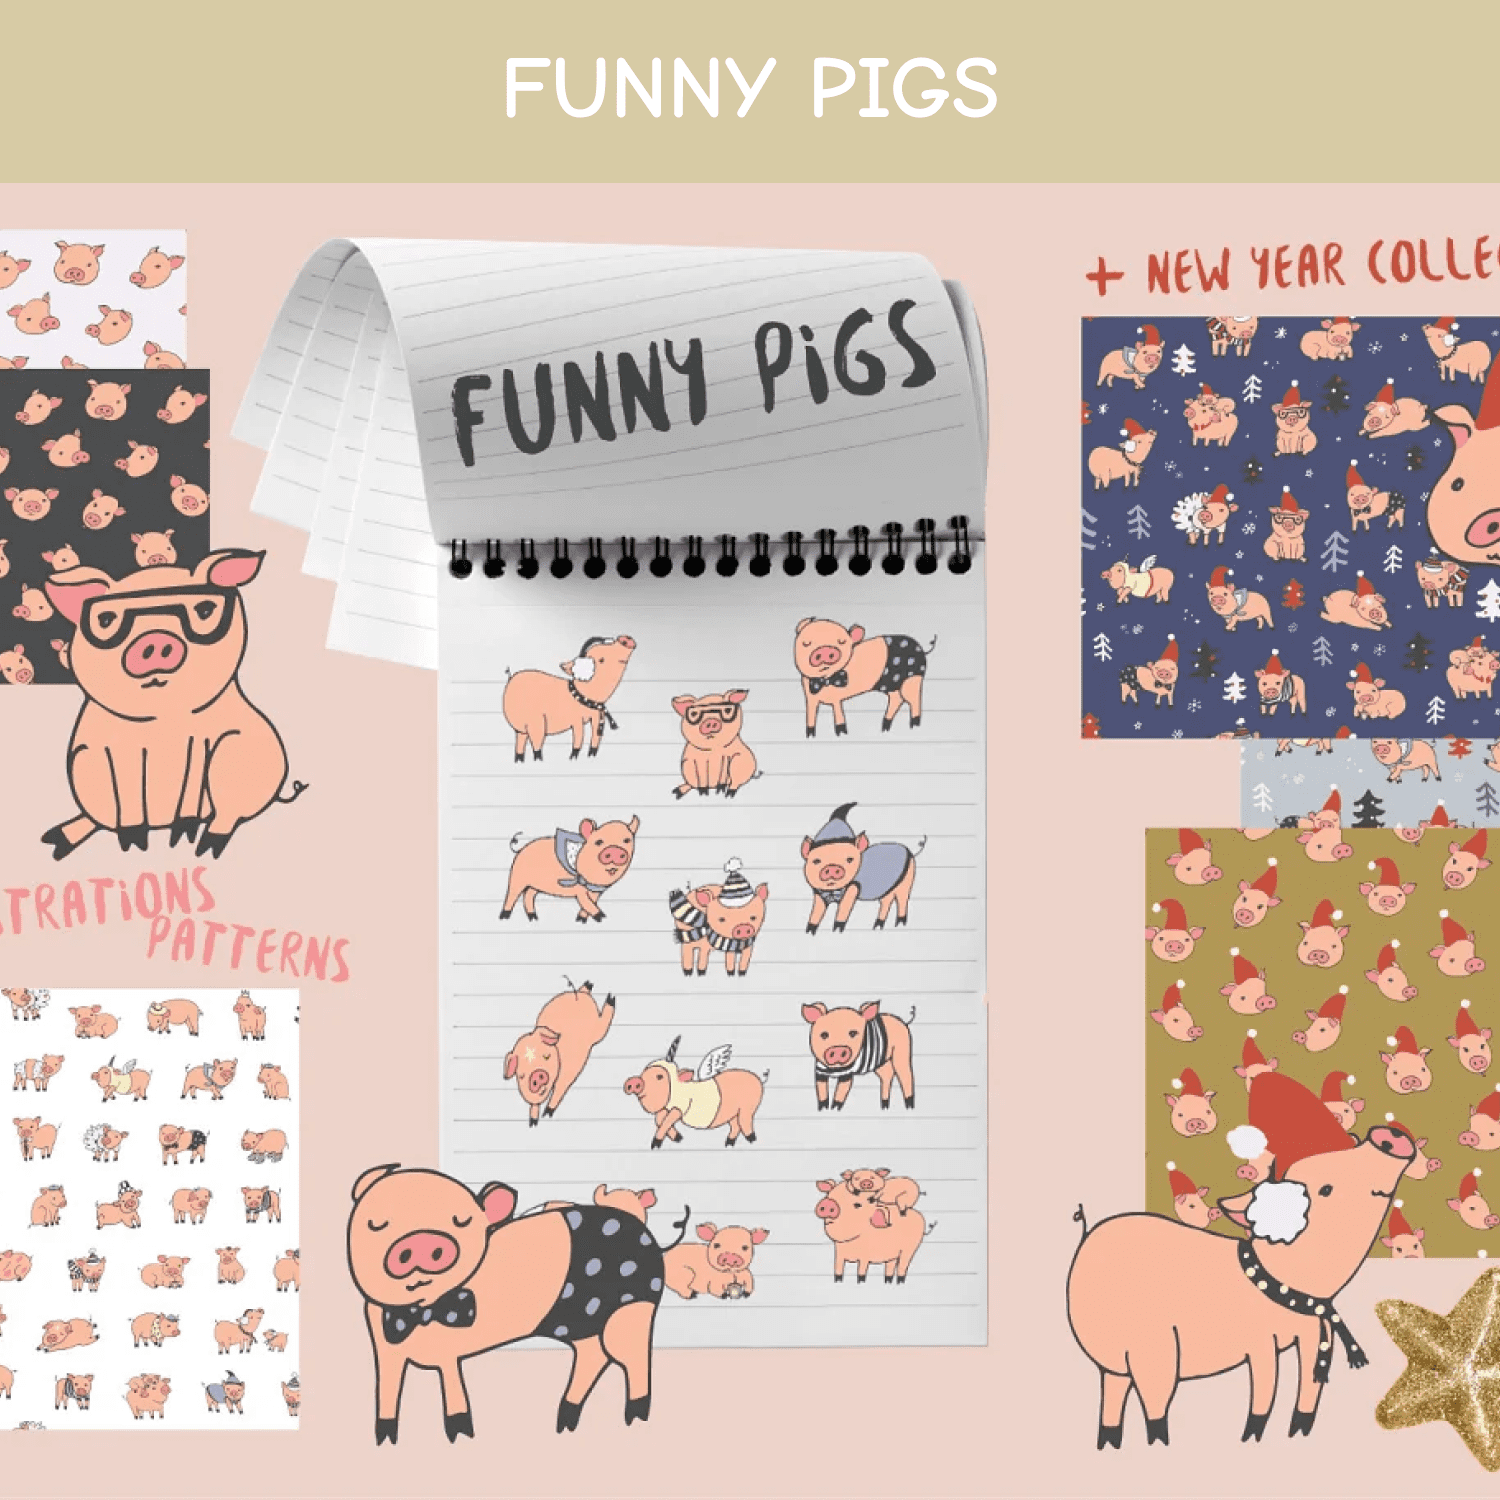 Funny Pigs.